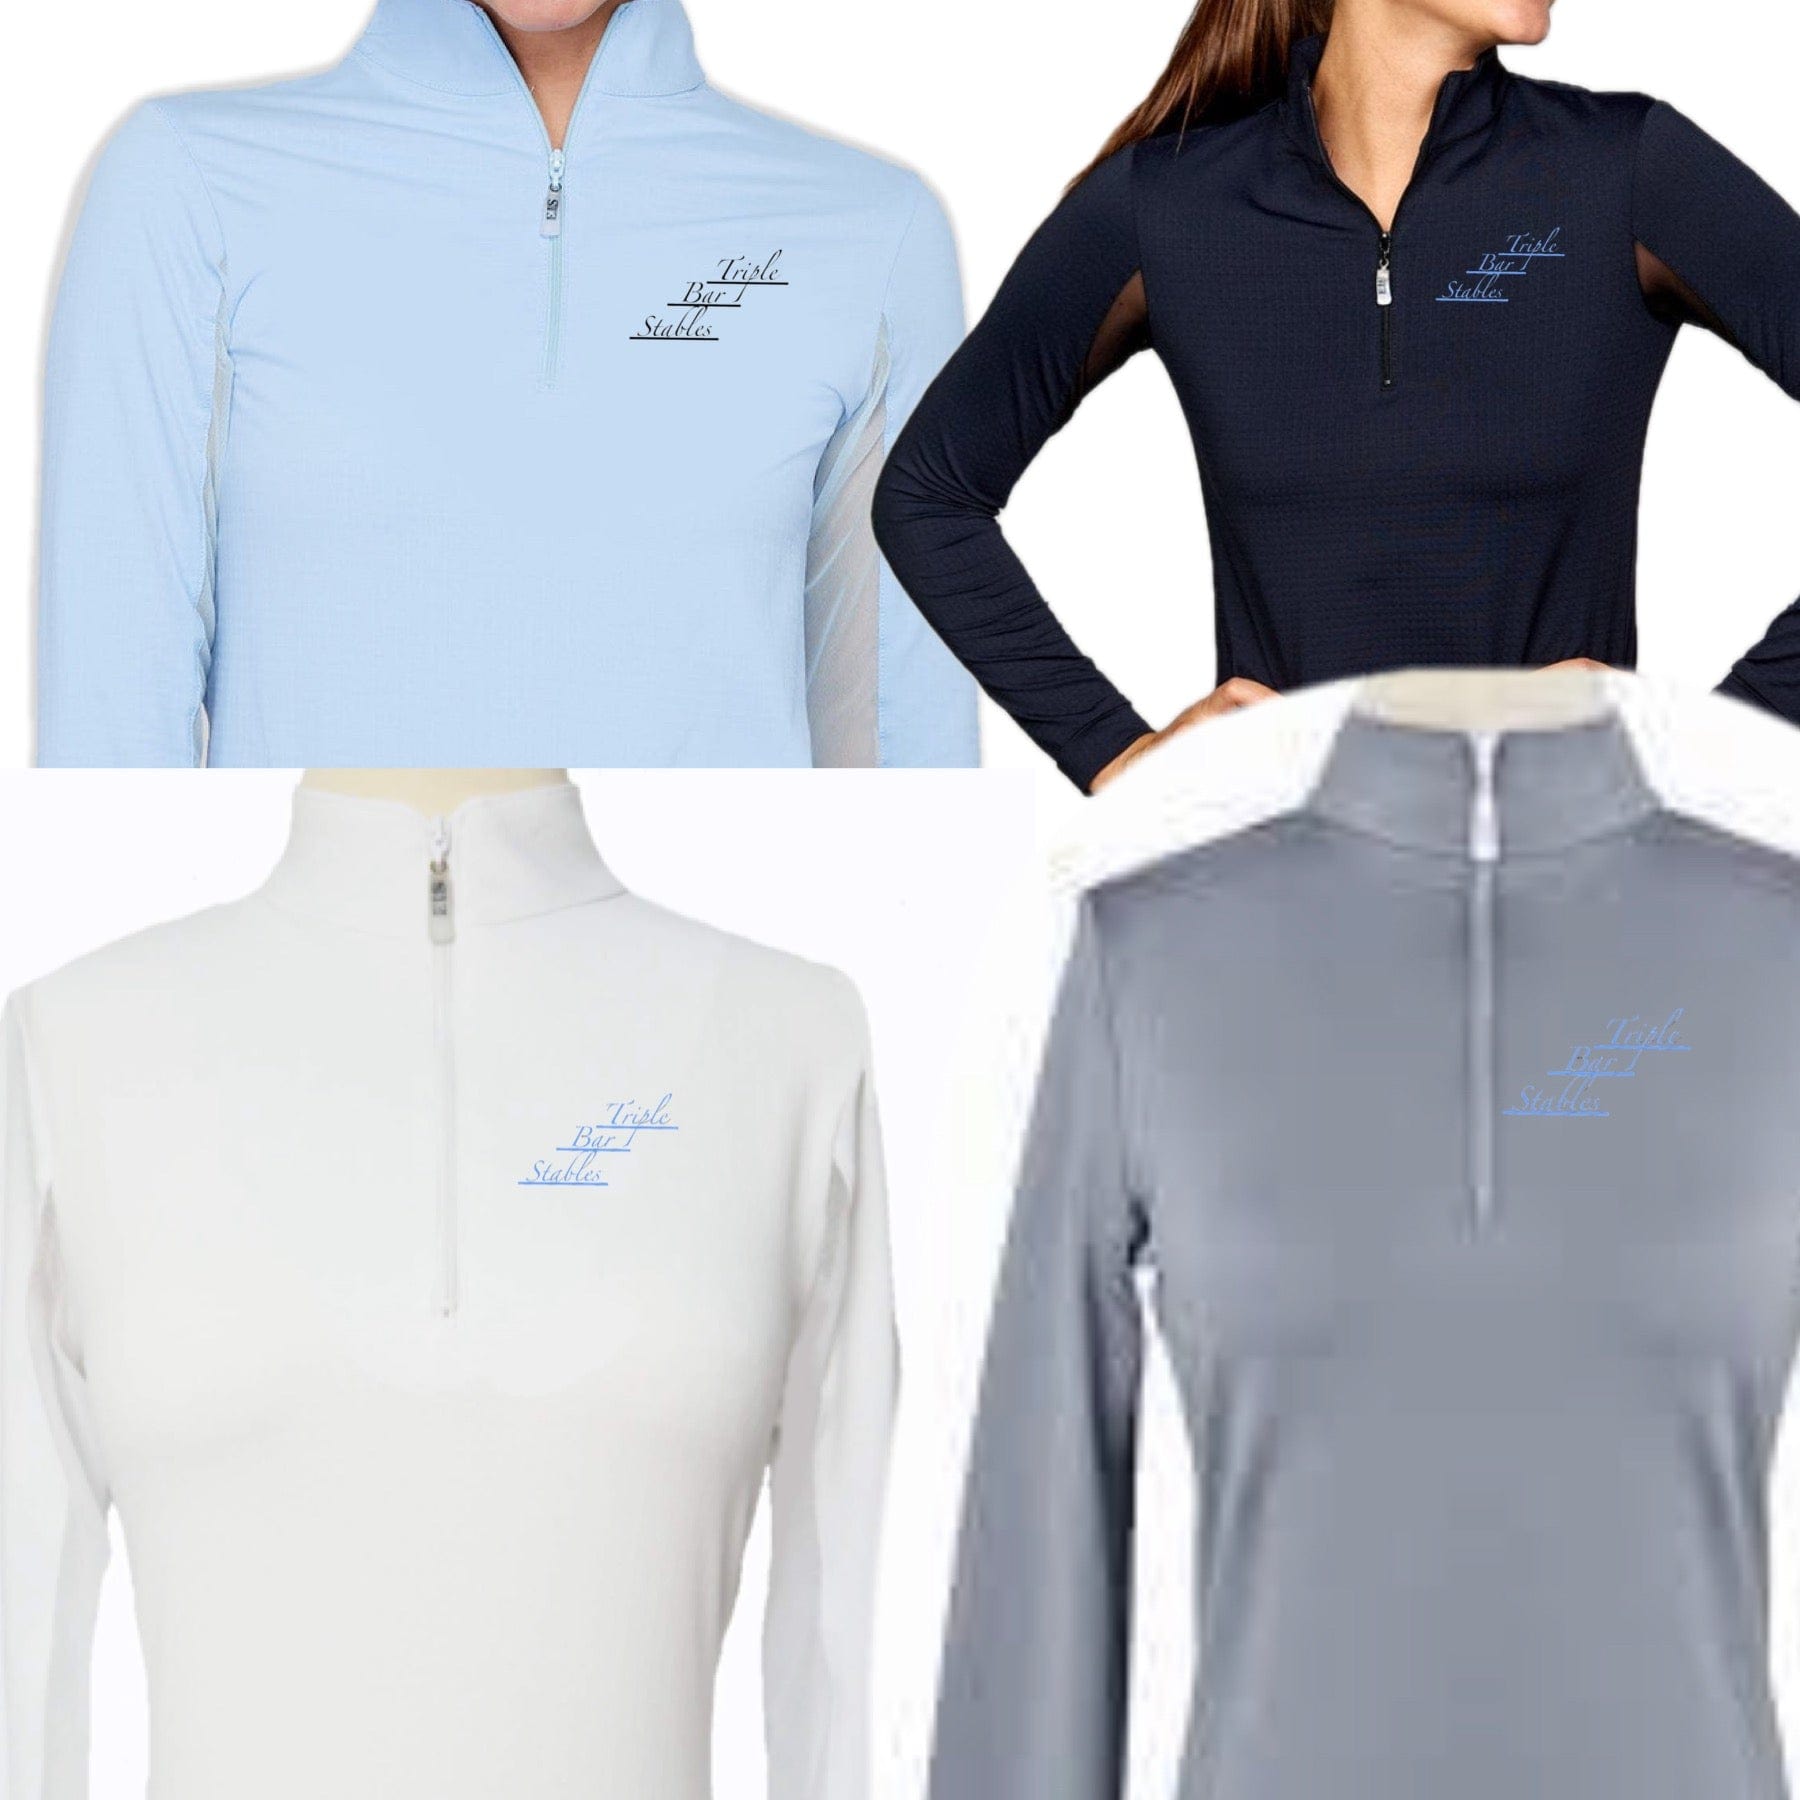 Equestrian Team Apparel Triple Bar Stables Sun Shirt equestrian team apparel online tack store mobile tack store custom farm apparel custom show stable clothing equestrian lifestyle horse show clothing riding clothes horses equestrian tack store